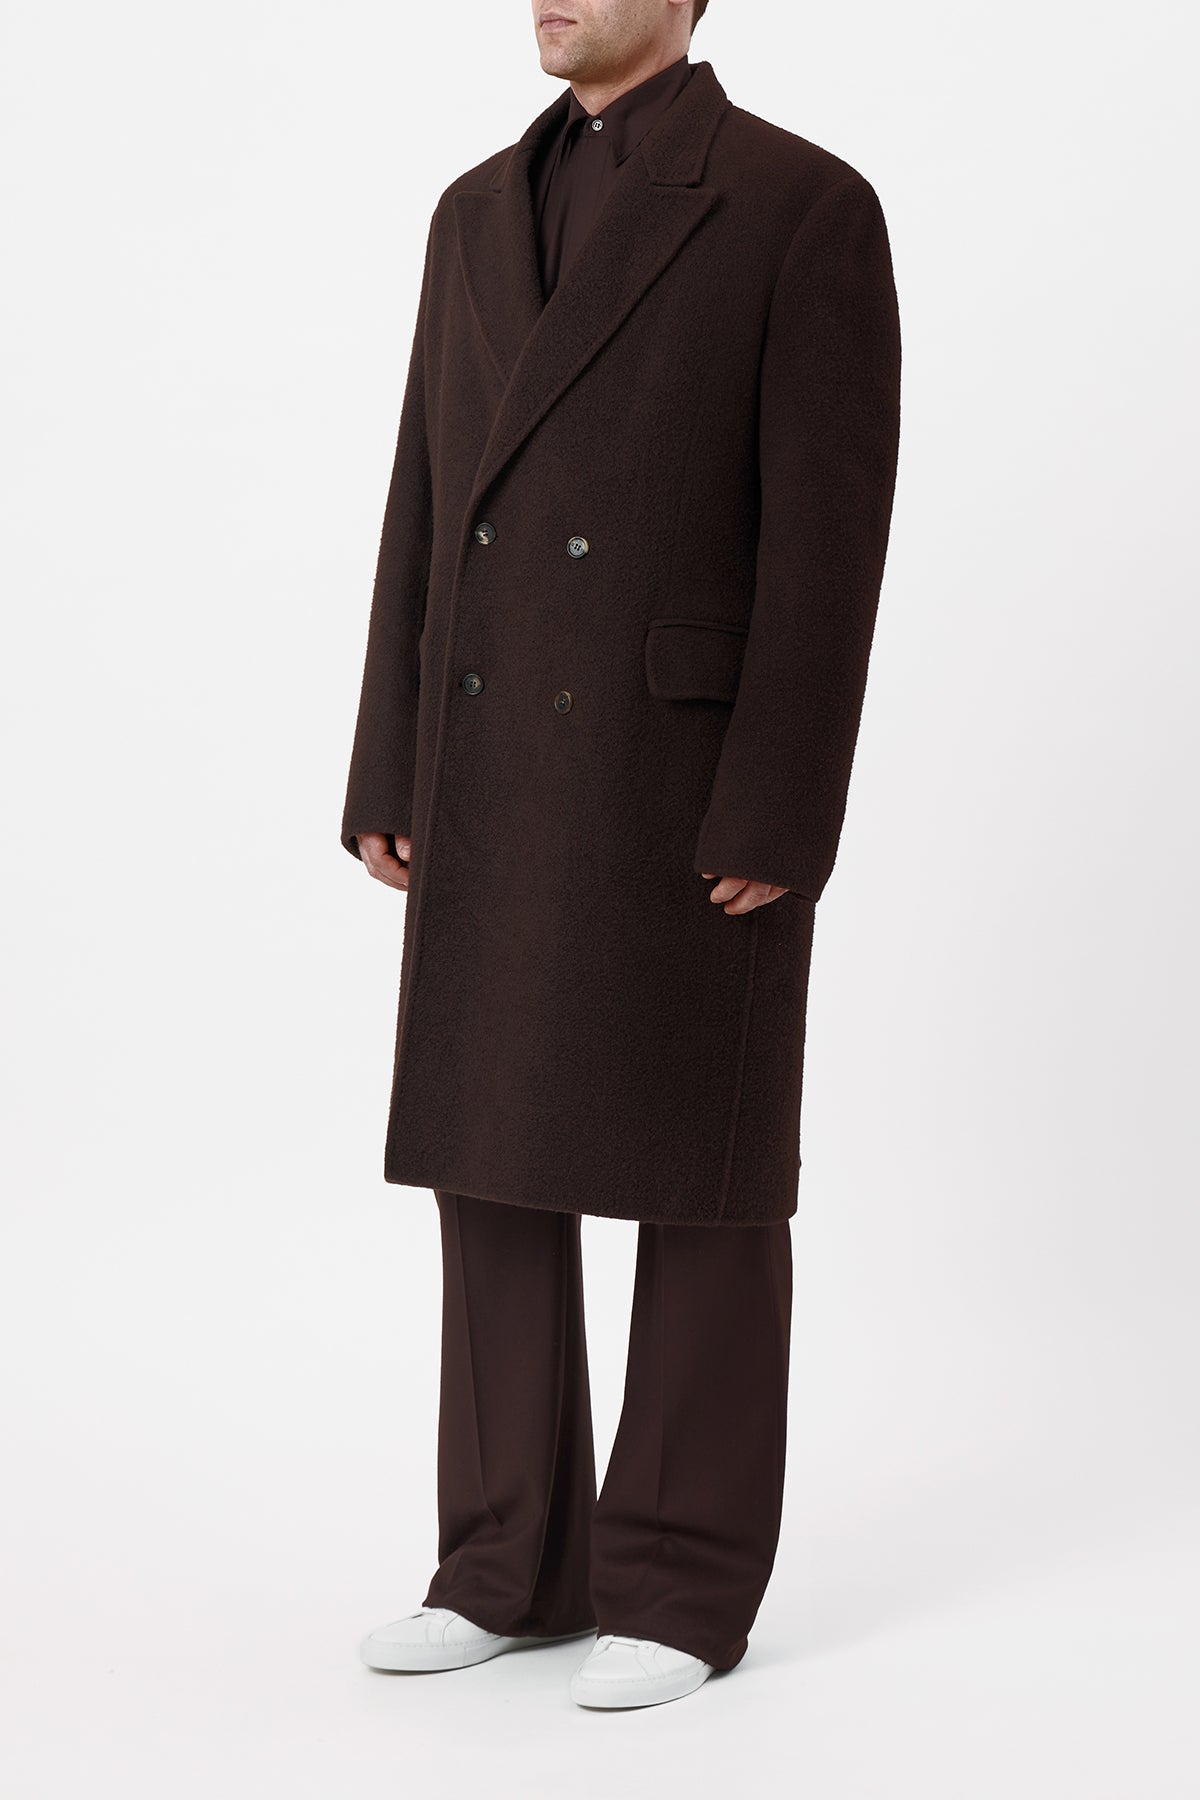 Mcaffrey Coat in Chocolate Double-Face Recycled Cashmere